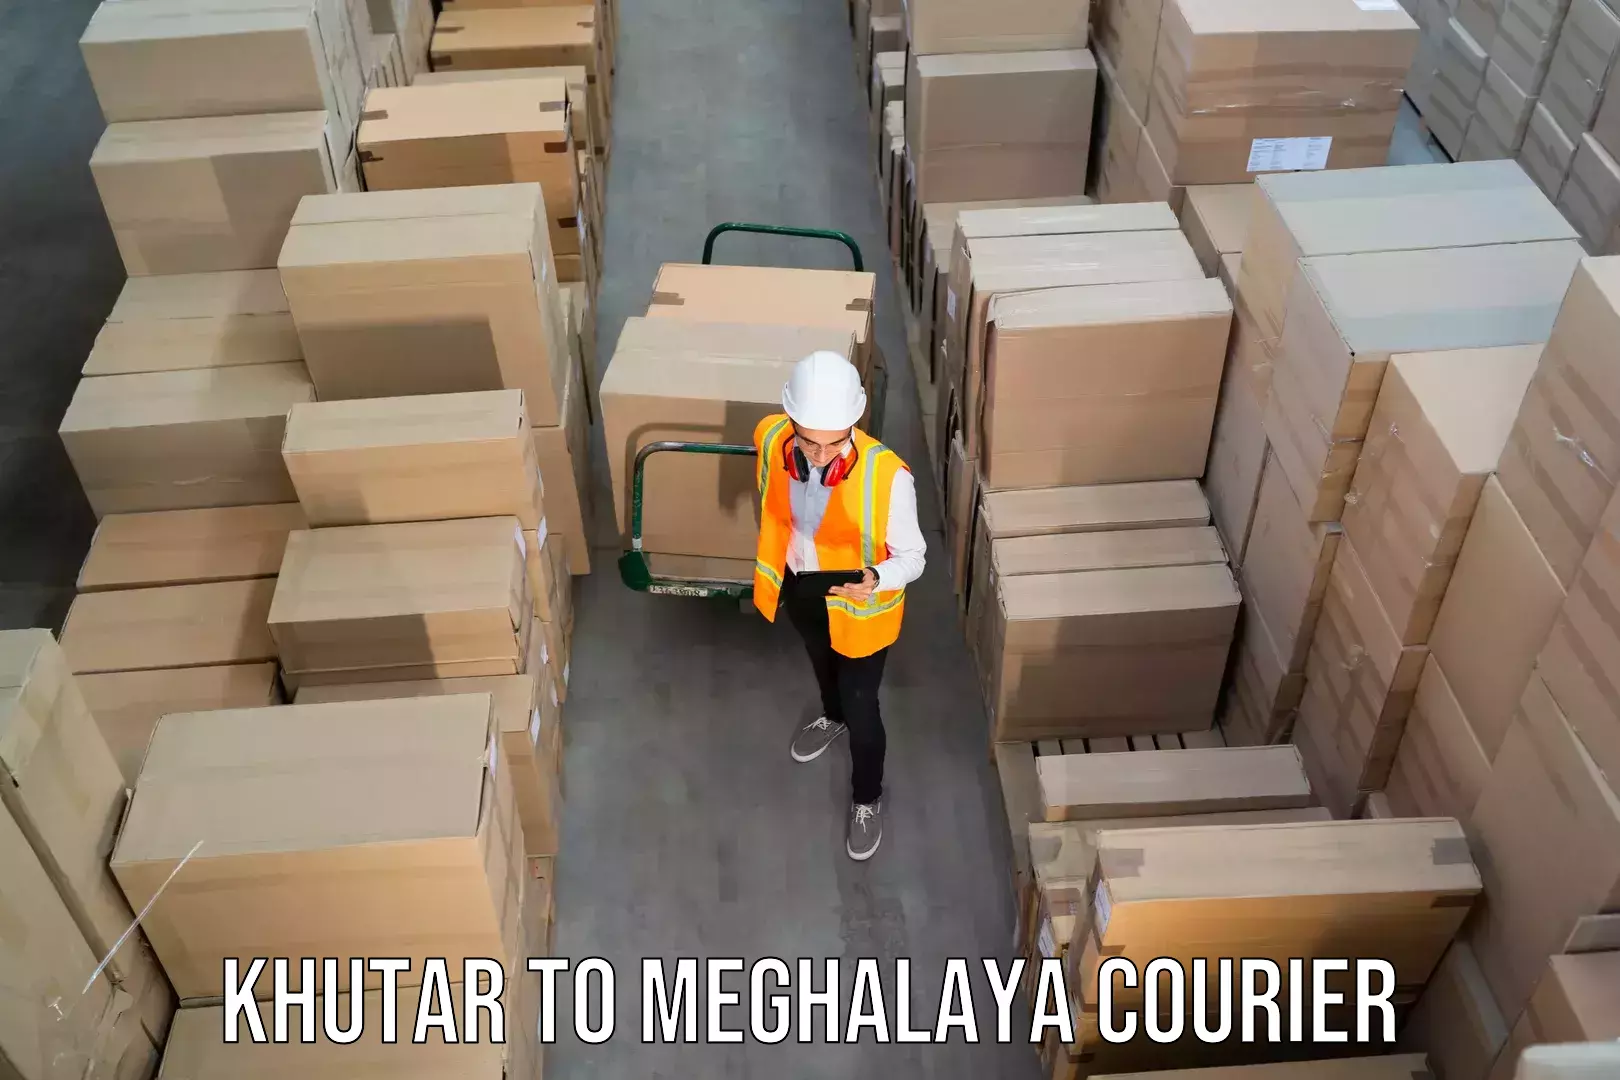 24-hour delivery options Khutar to Meghalaya